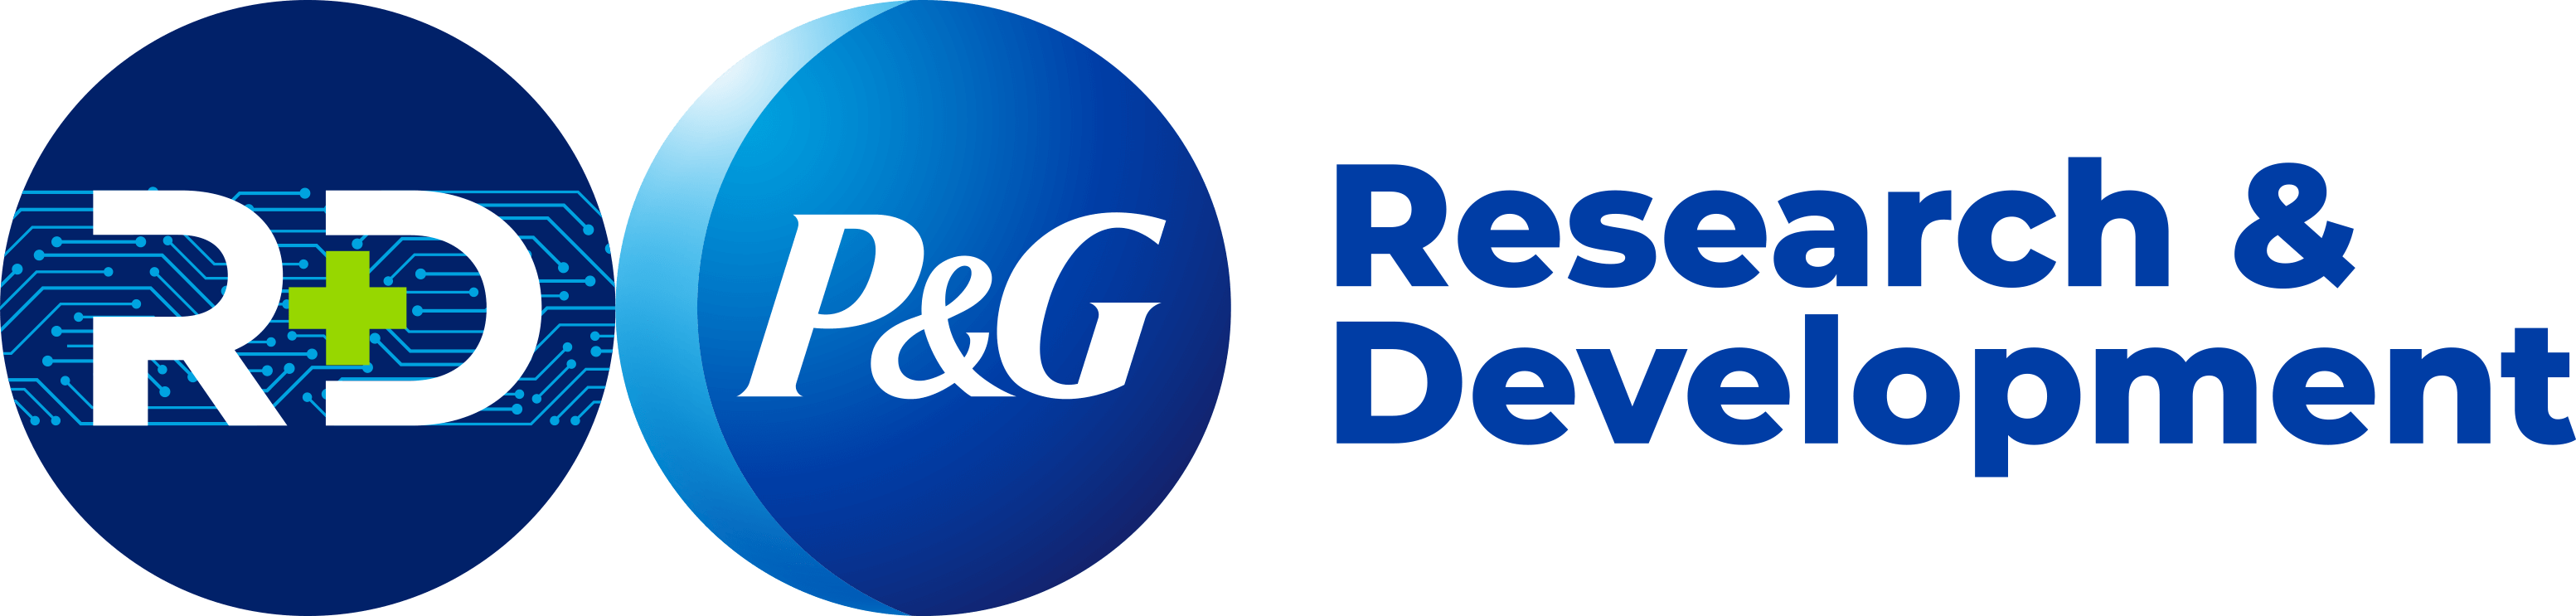 P&G Research and Development logo